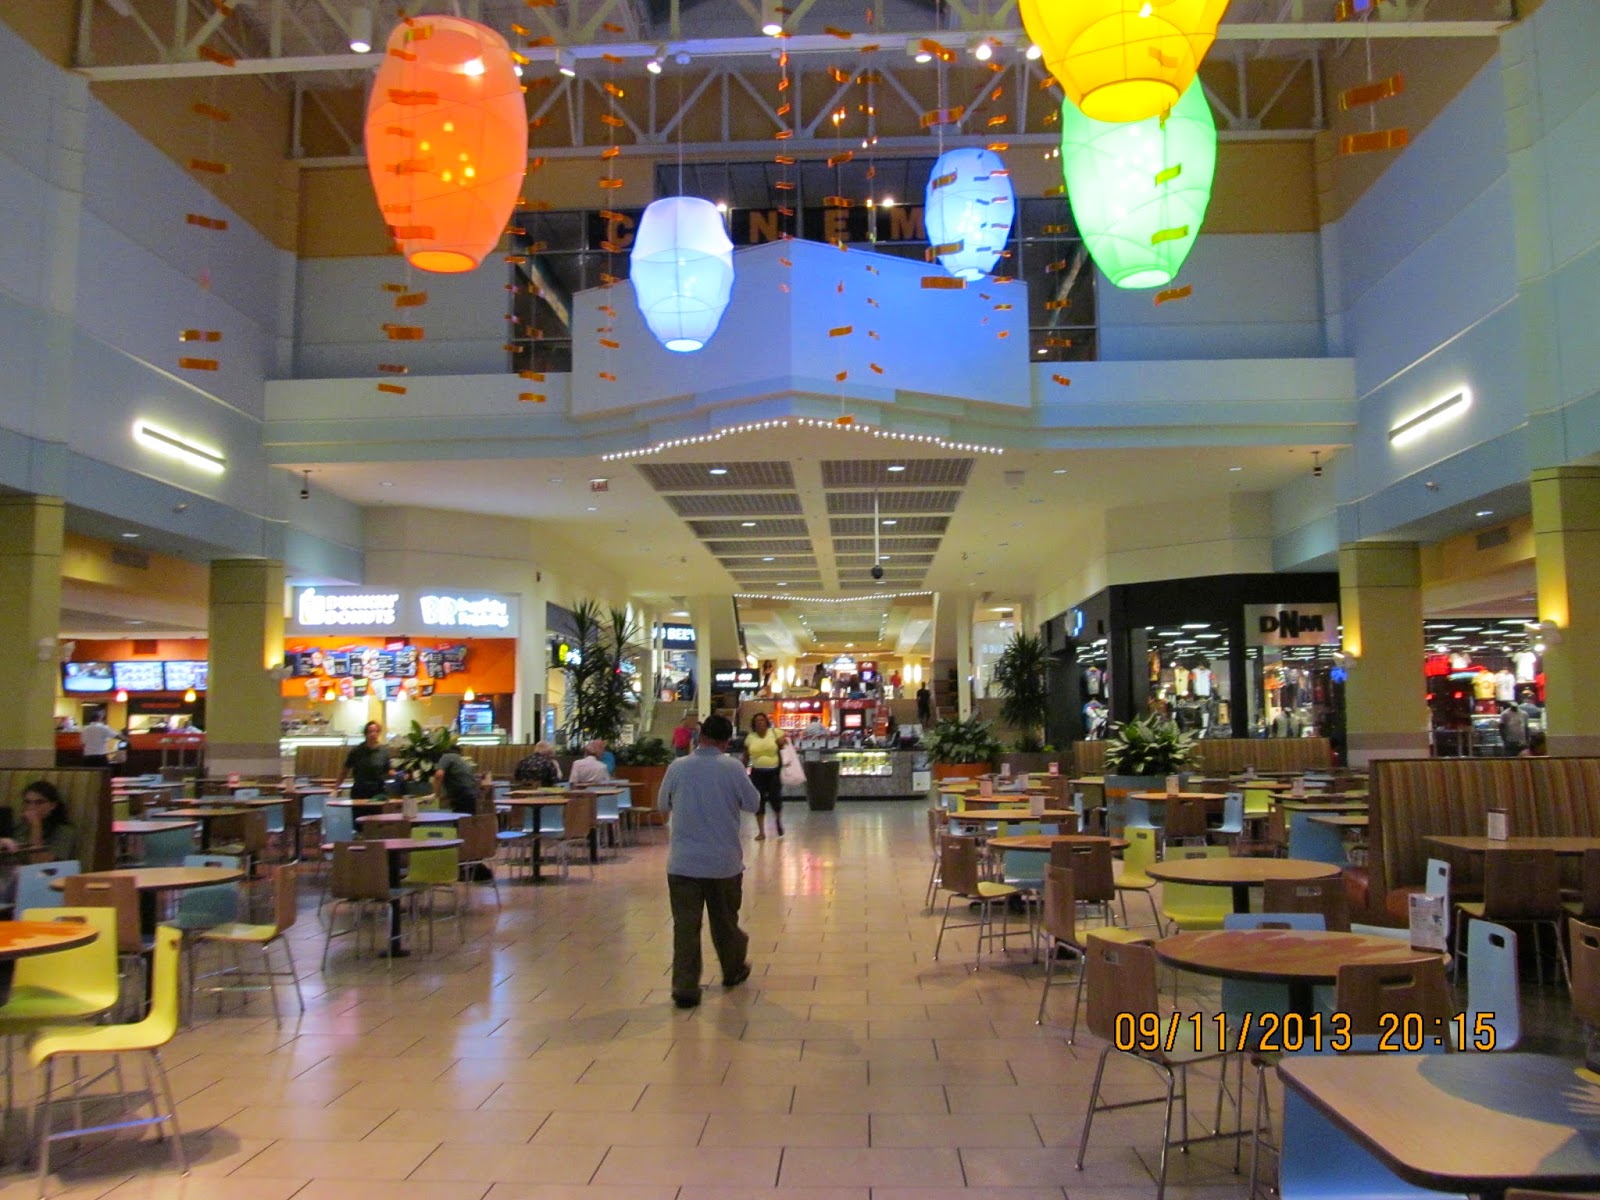 Round 1 Bowling and Arcade Center in North Riverside Park Mall in North  Riverside IL, former Sears and it started out as a Montgomery Ward. :  r/NotFoolingAnybody